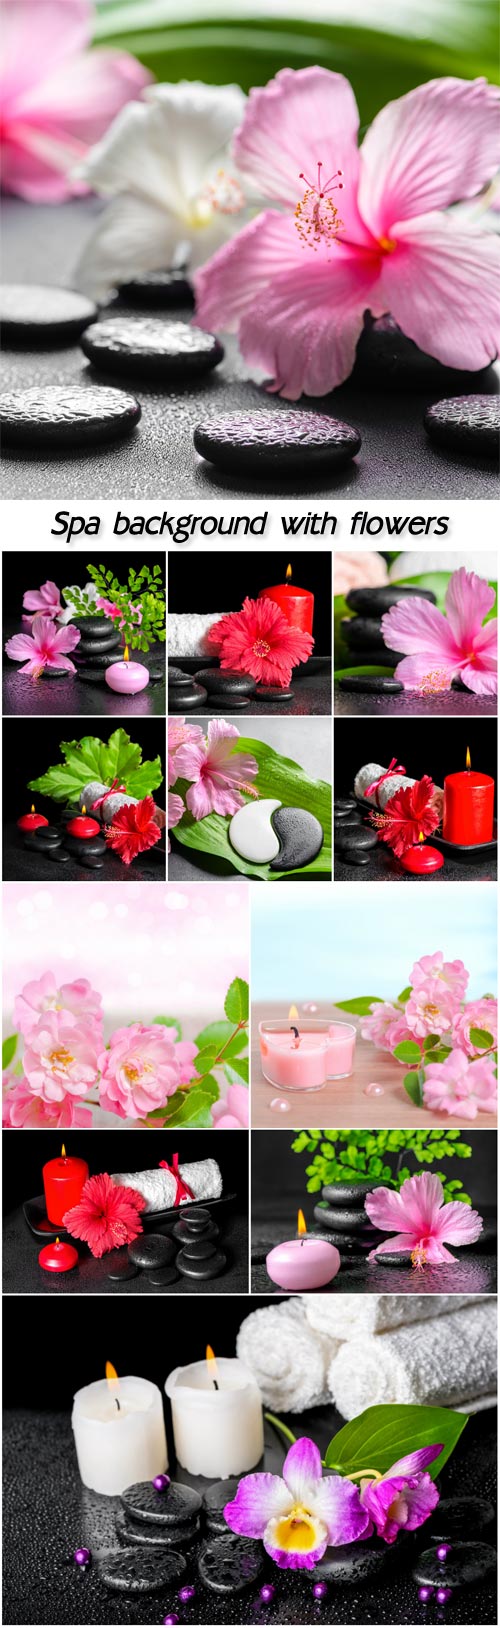 Spa background with flowers, candles and spa stones